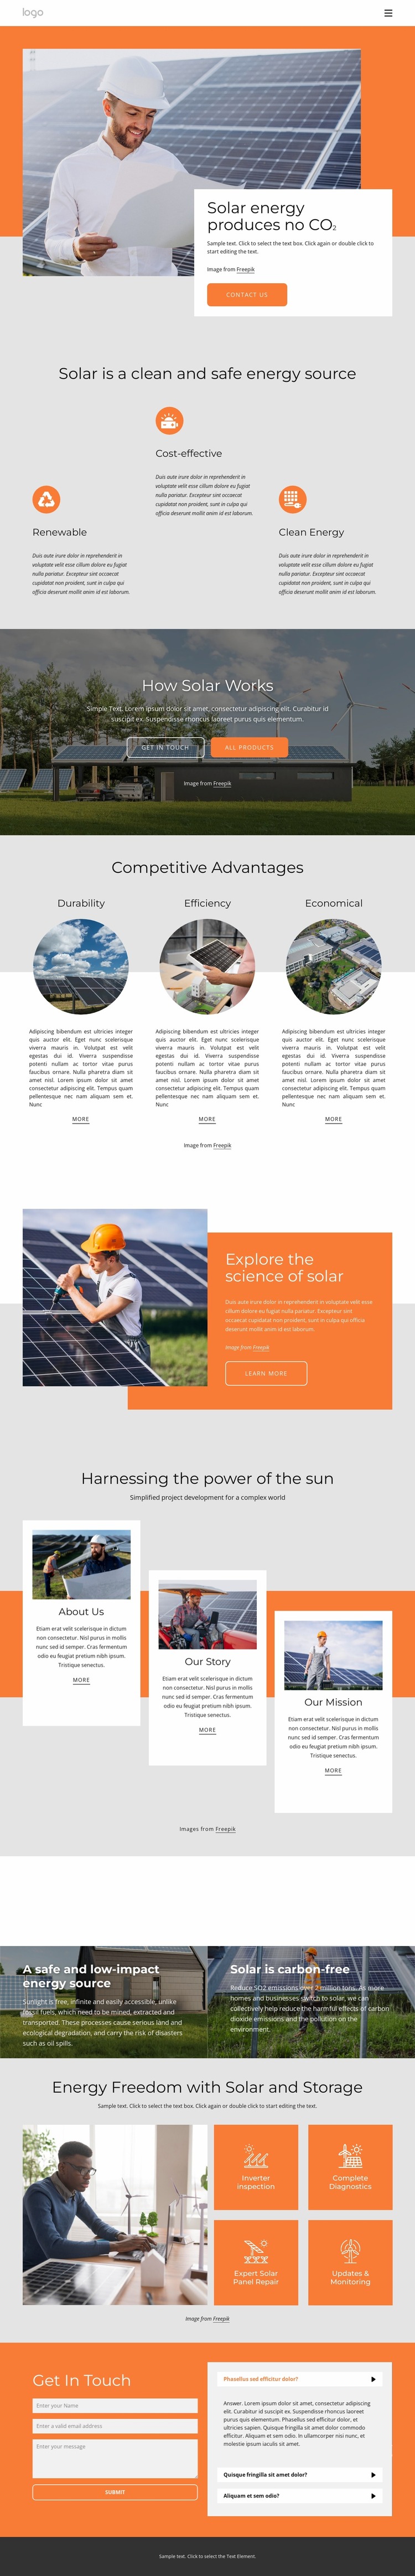 Power your home with clean solar energy Website Mockup